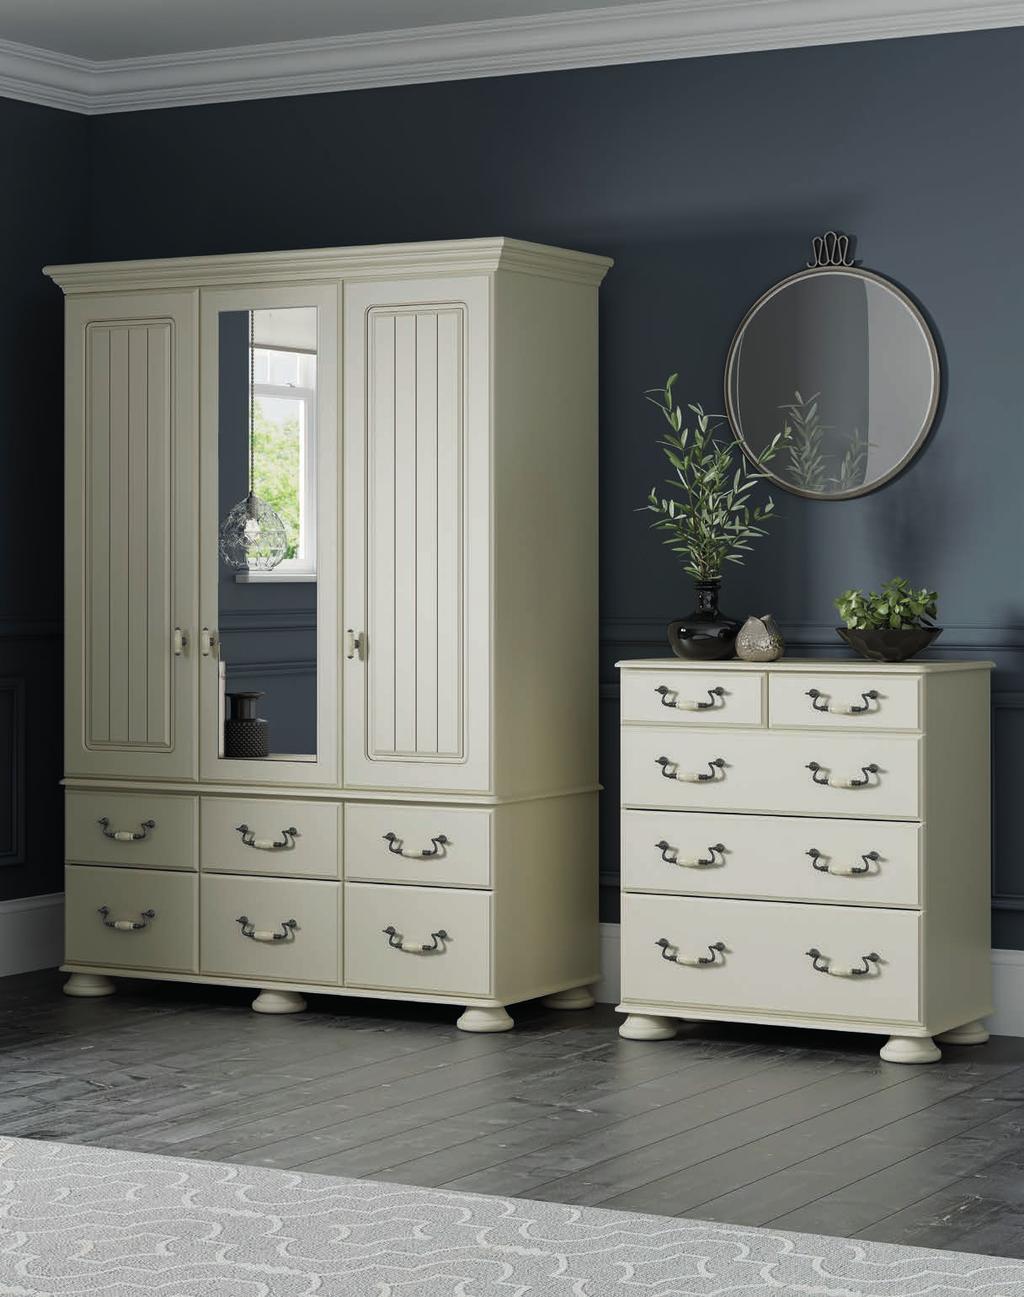 SIGNATURE KINGSTOWN 21 SIGNATURE Hand finished bedroom furniture. Signature is a must for any home. This hand finished antique cream or white painted furniture will compliment most surroundings.